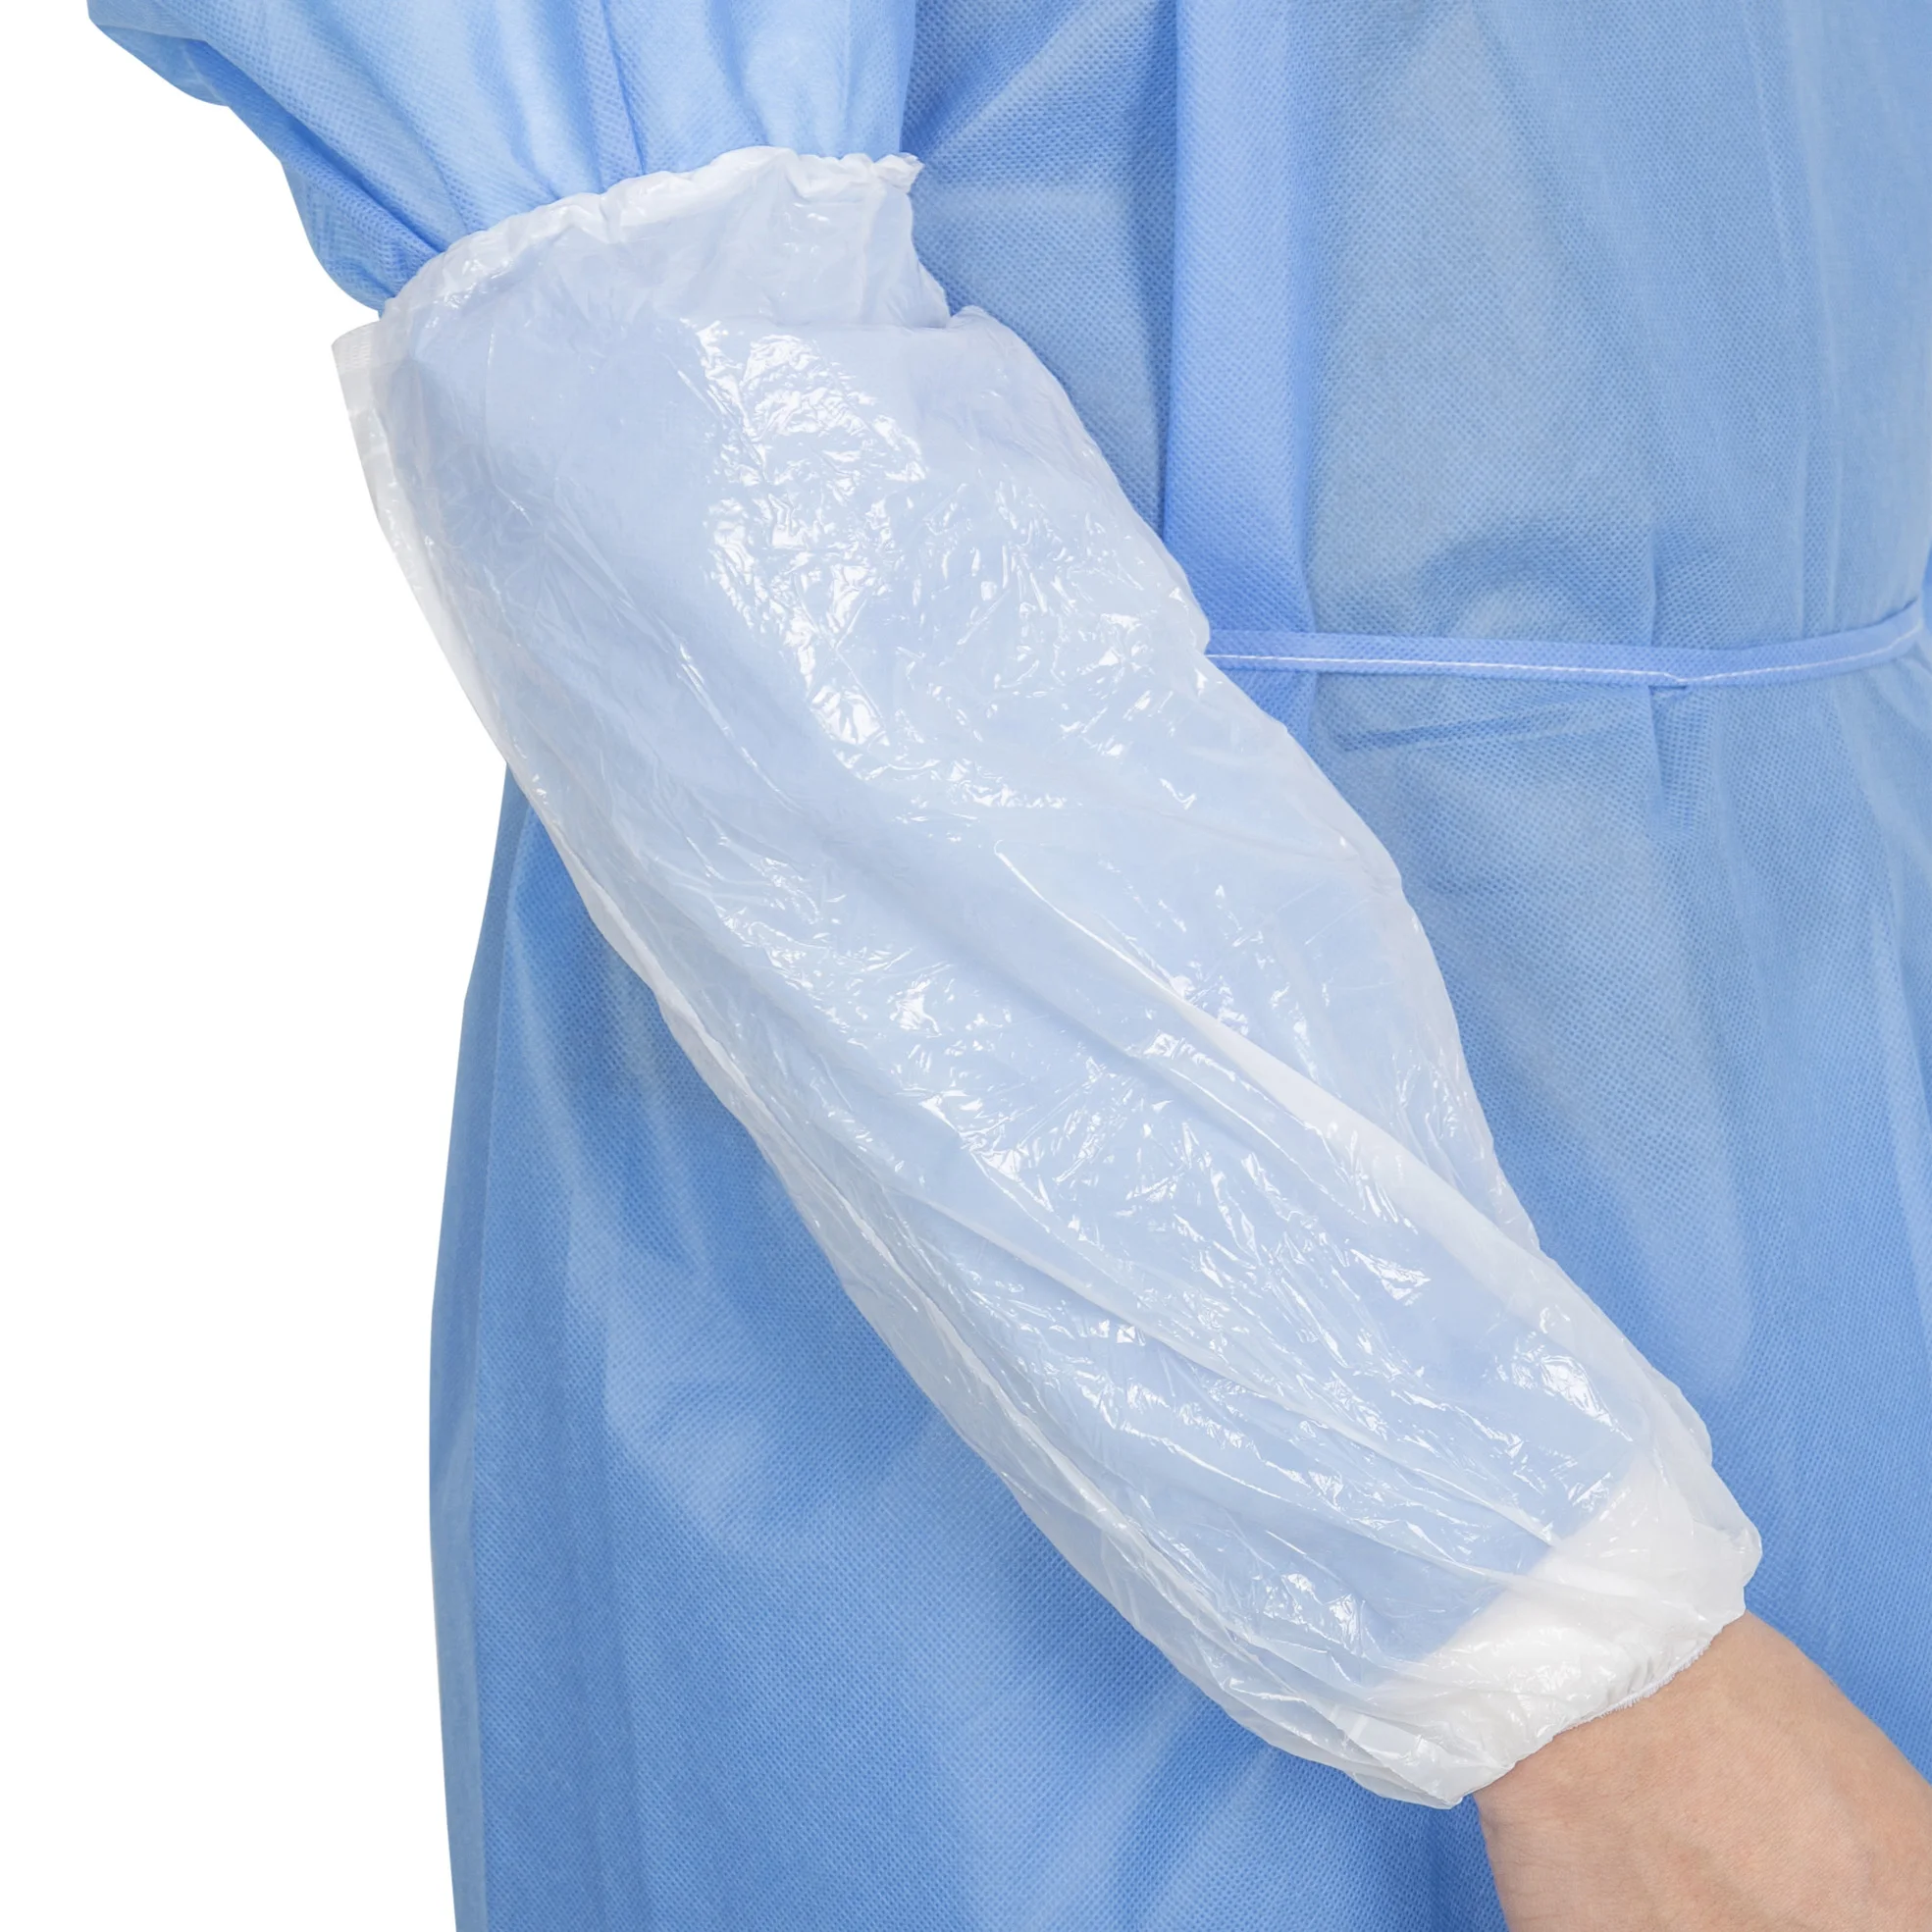 pe sleeve cover Protector  Disposable Arm/Sleeves Covers Waterproof elastic cuffs materials disposable arm sleeves covers (1600459801877)